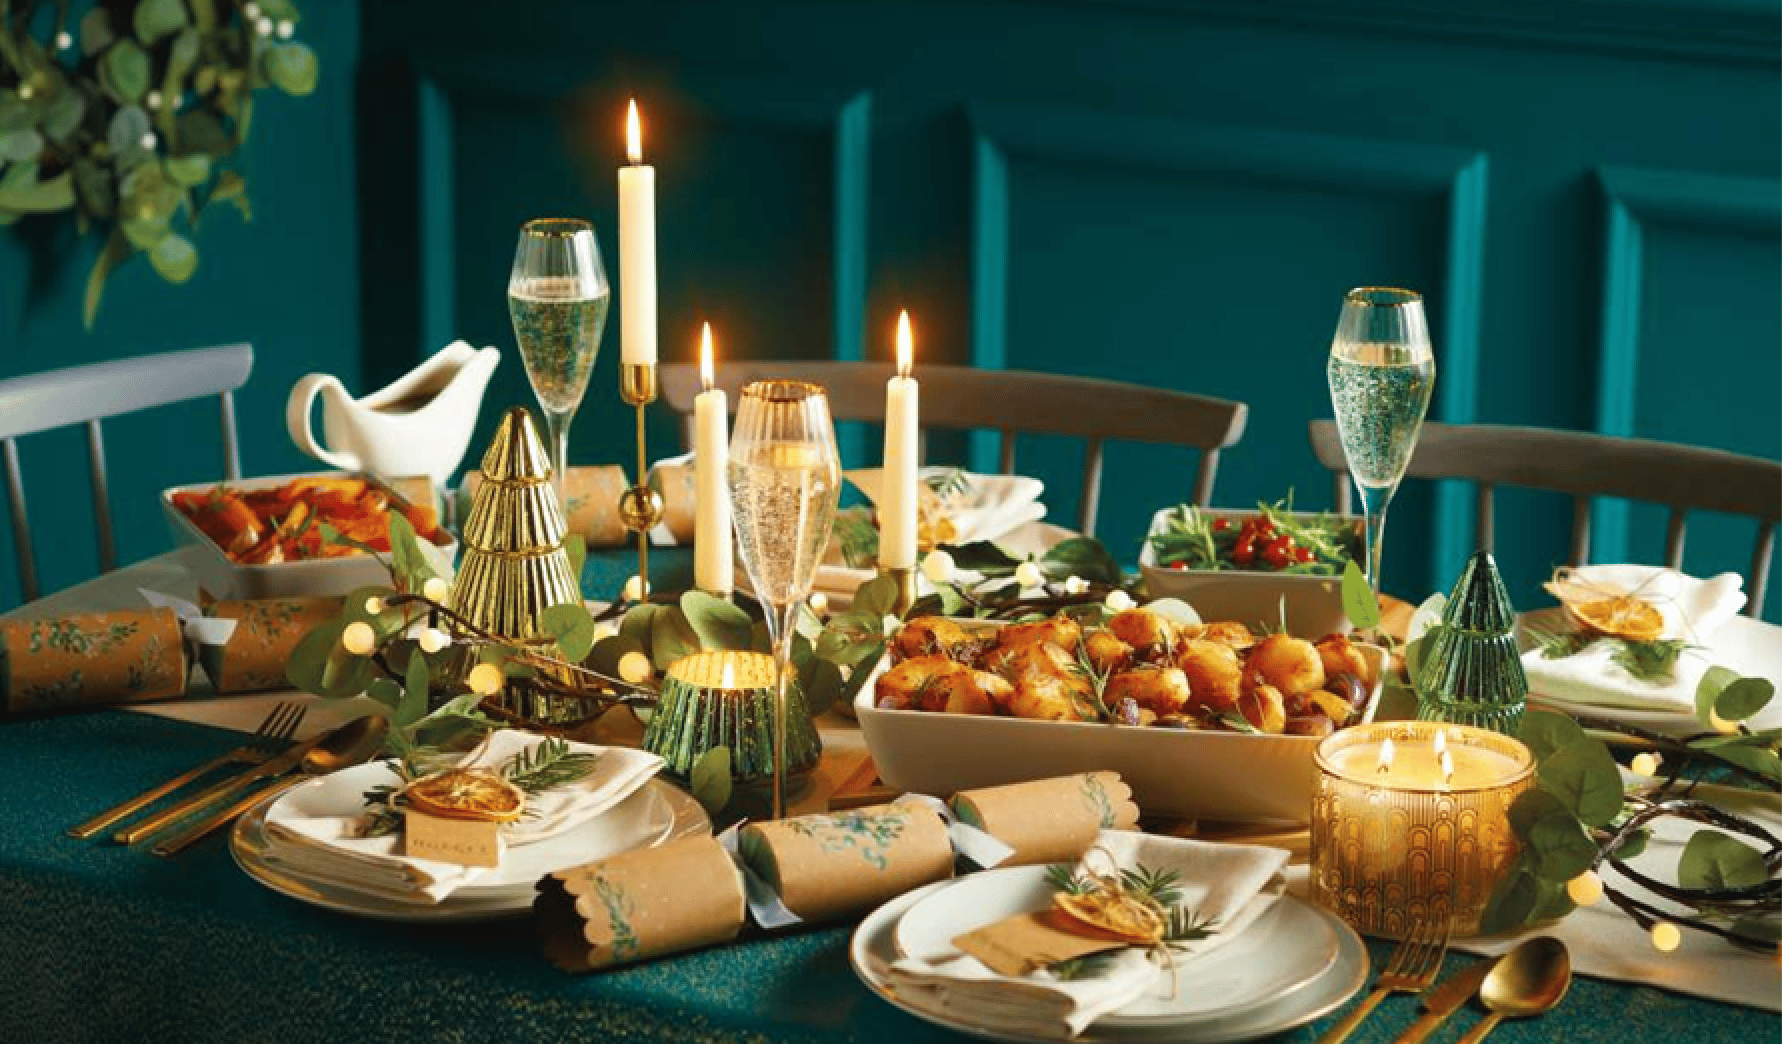 THE CHEAPEST SUPERMARKETS TO SAVE ON CHRISTMAS DINNER